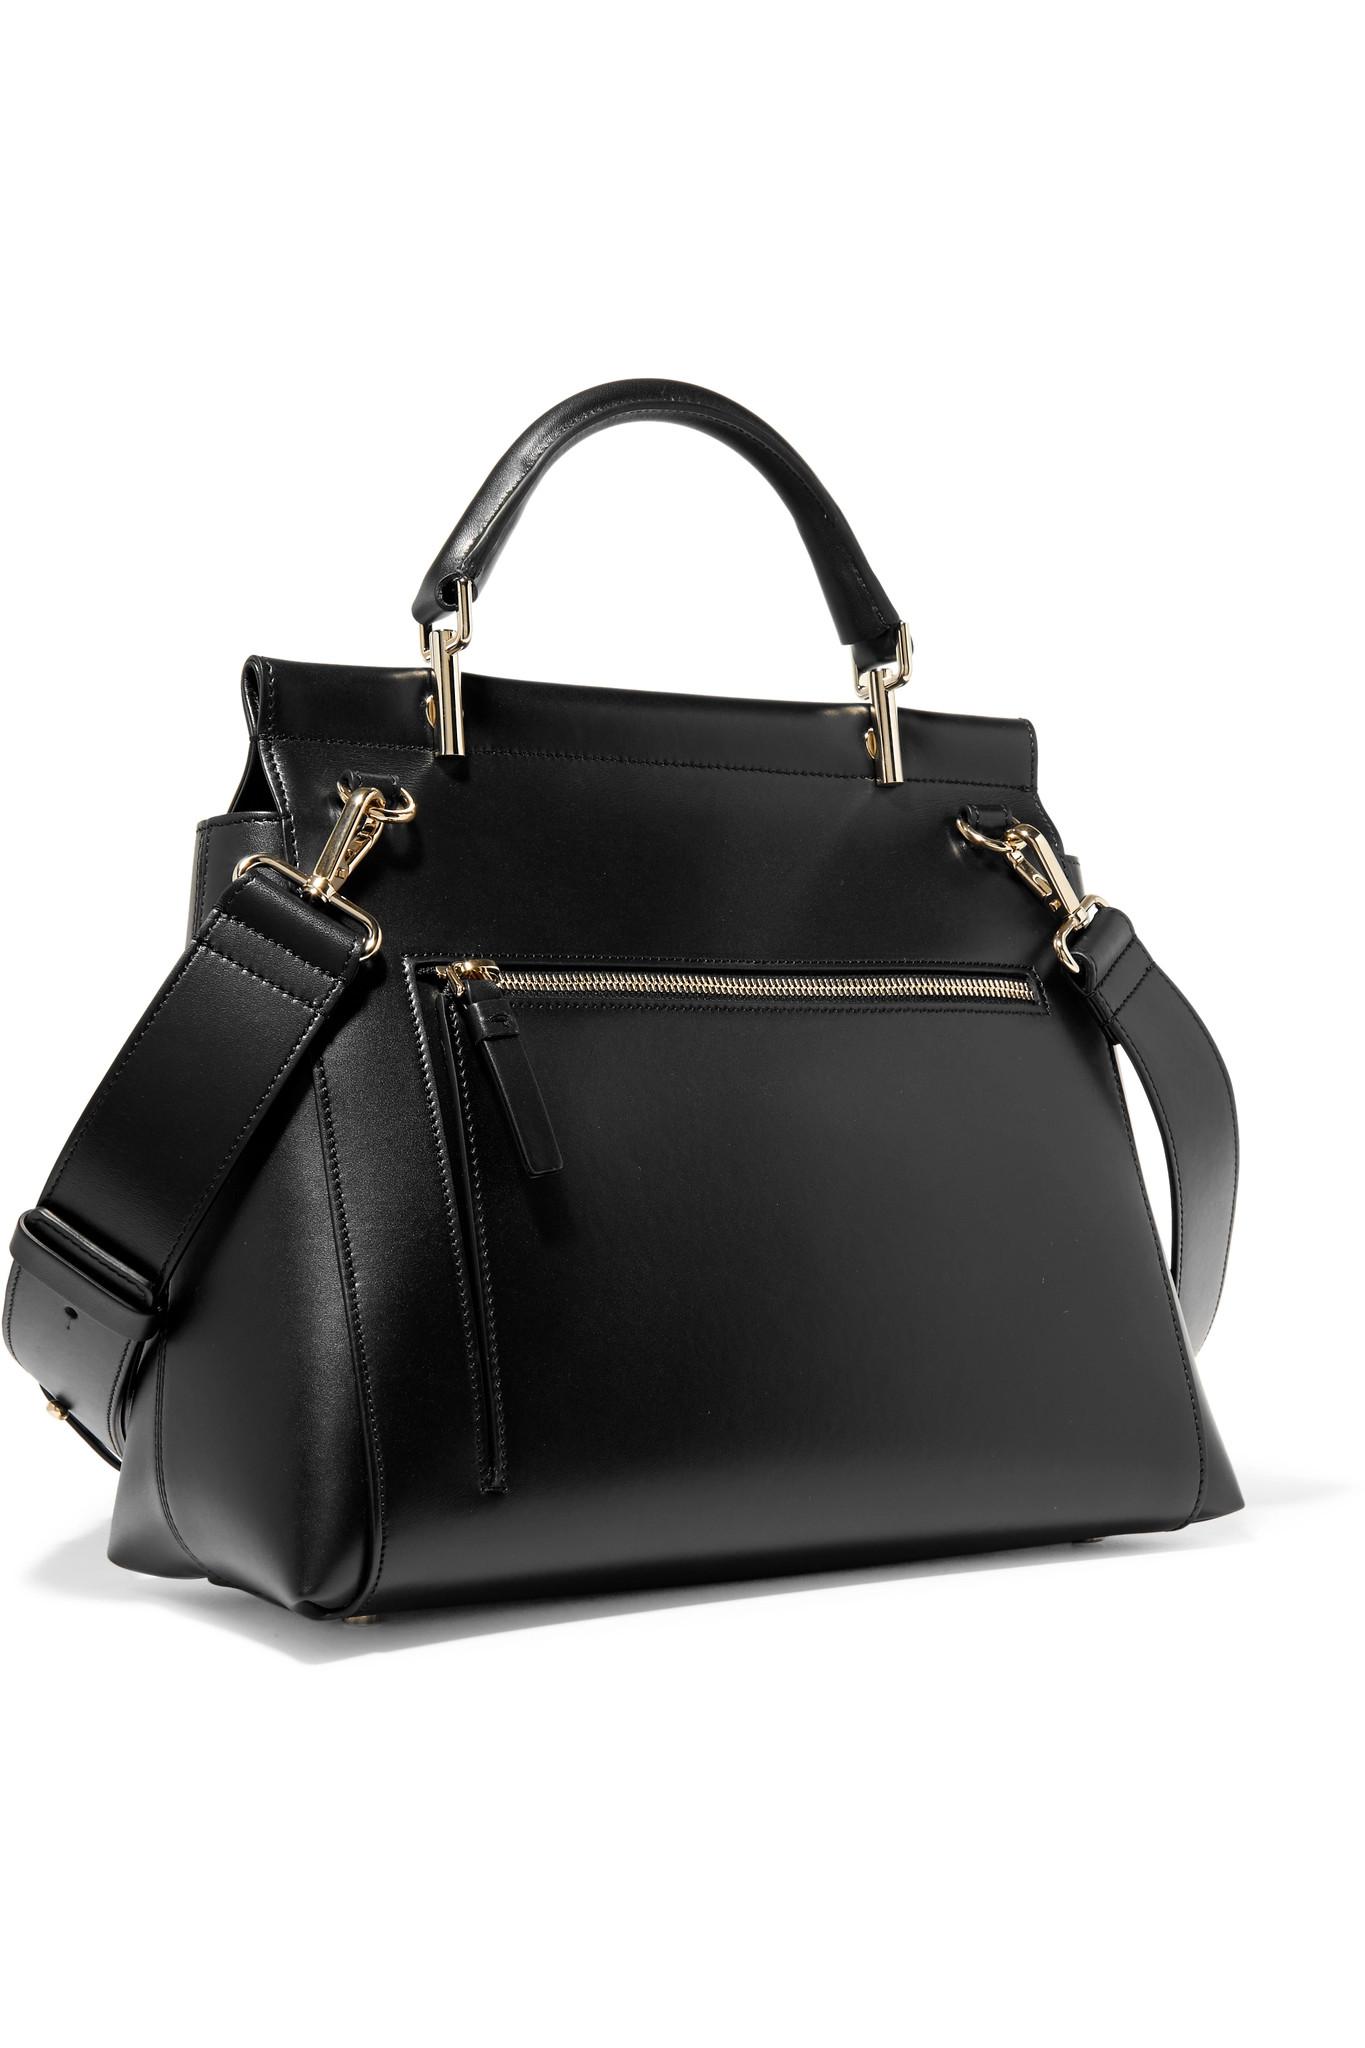 Roger Vivier Viv Cabas Small Leather Tote in Black - Lyst